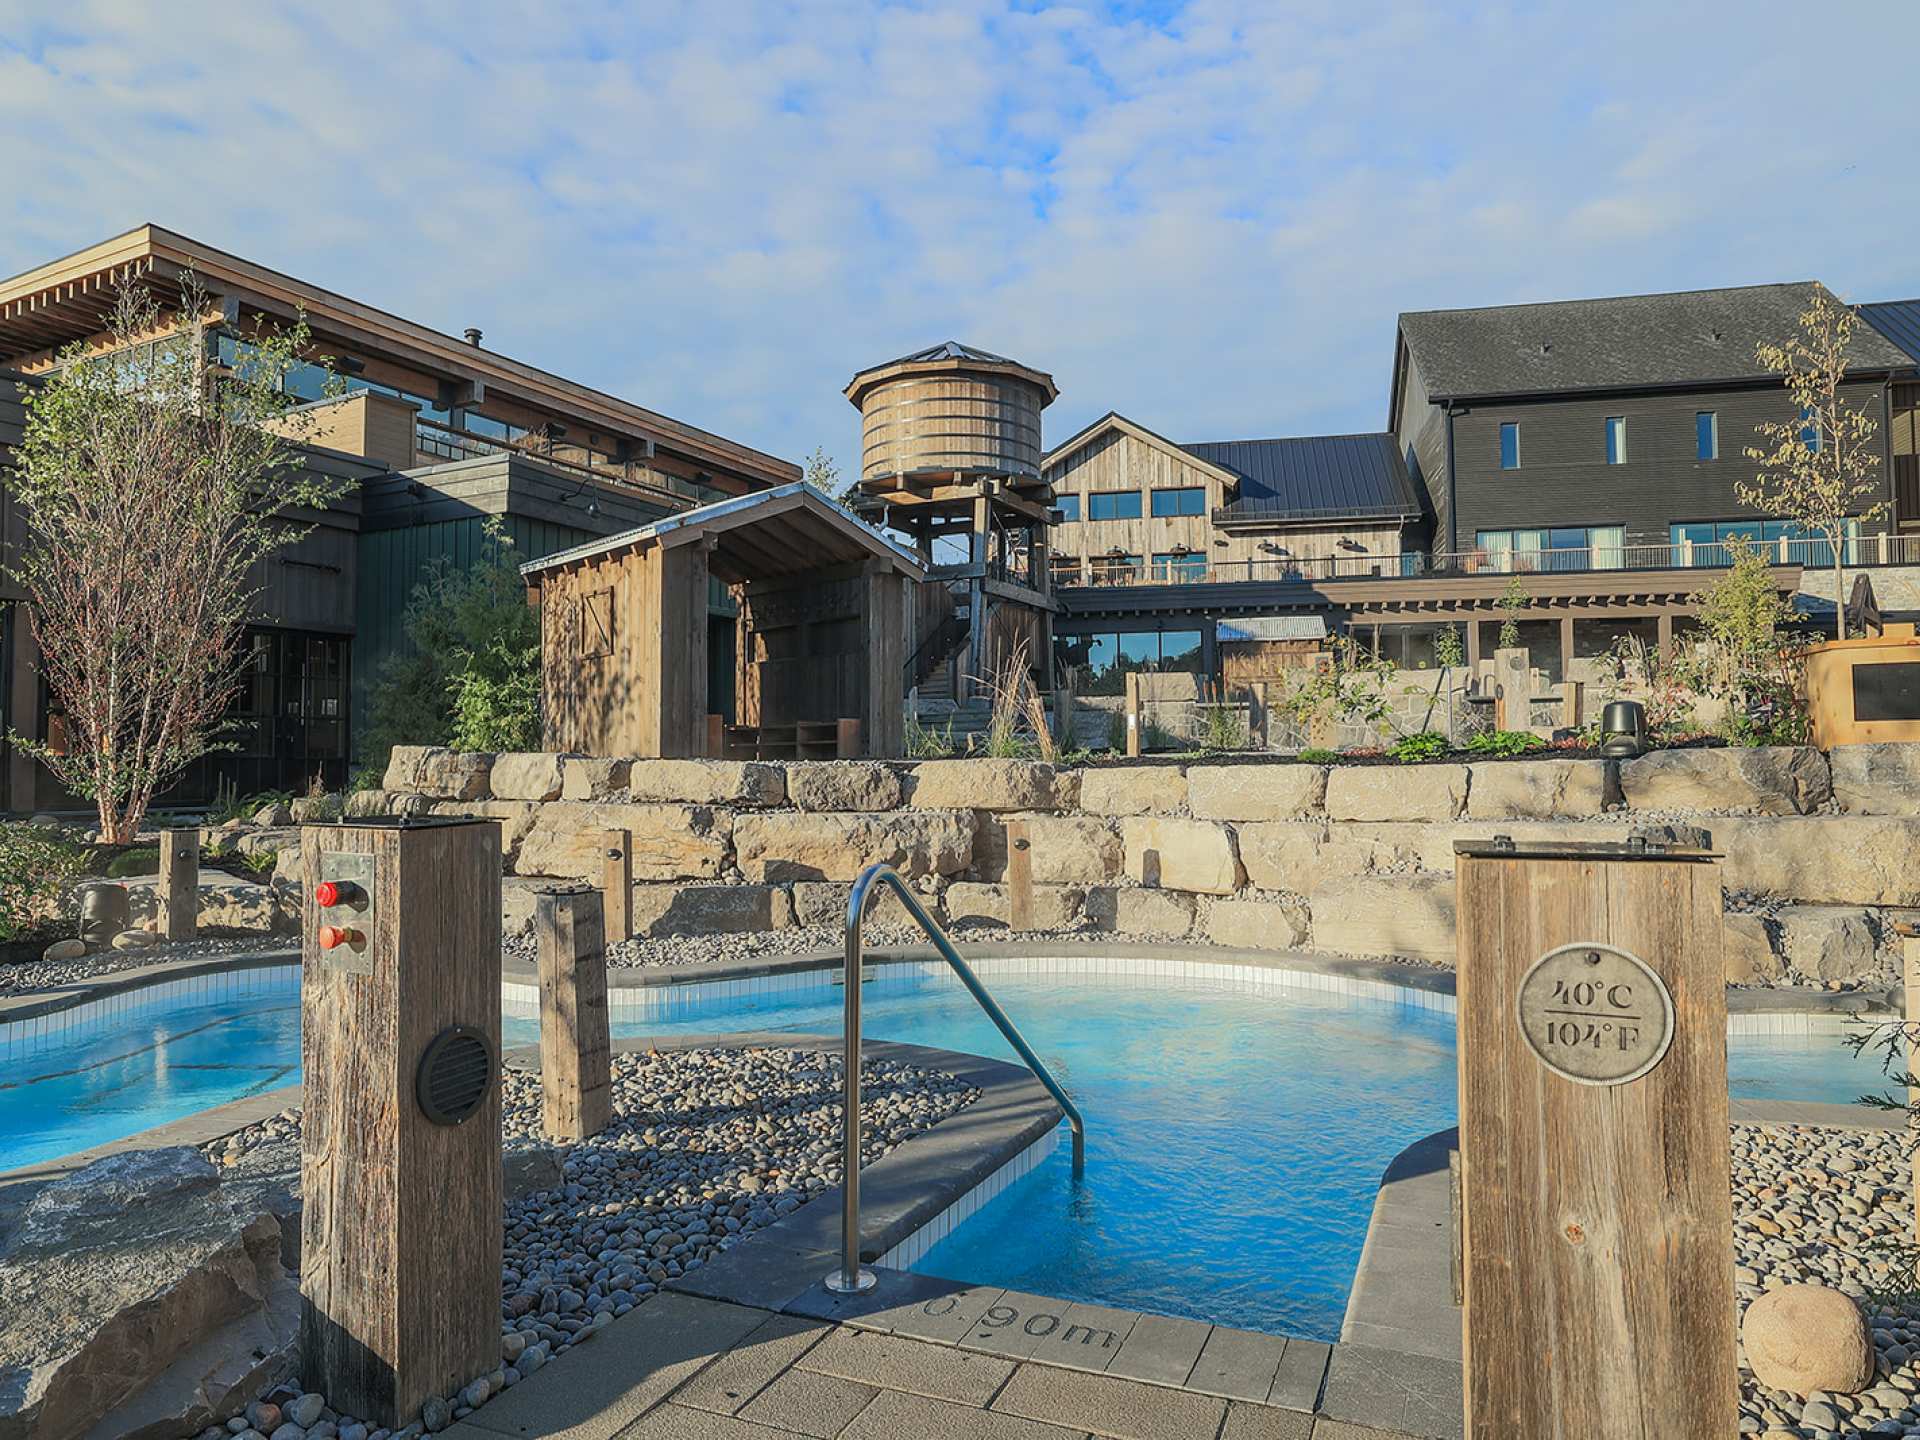 Best spas near Toronto | Outdoor pools at Thermea in Whitby